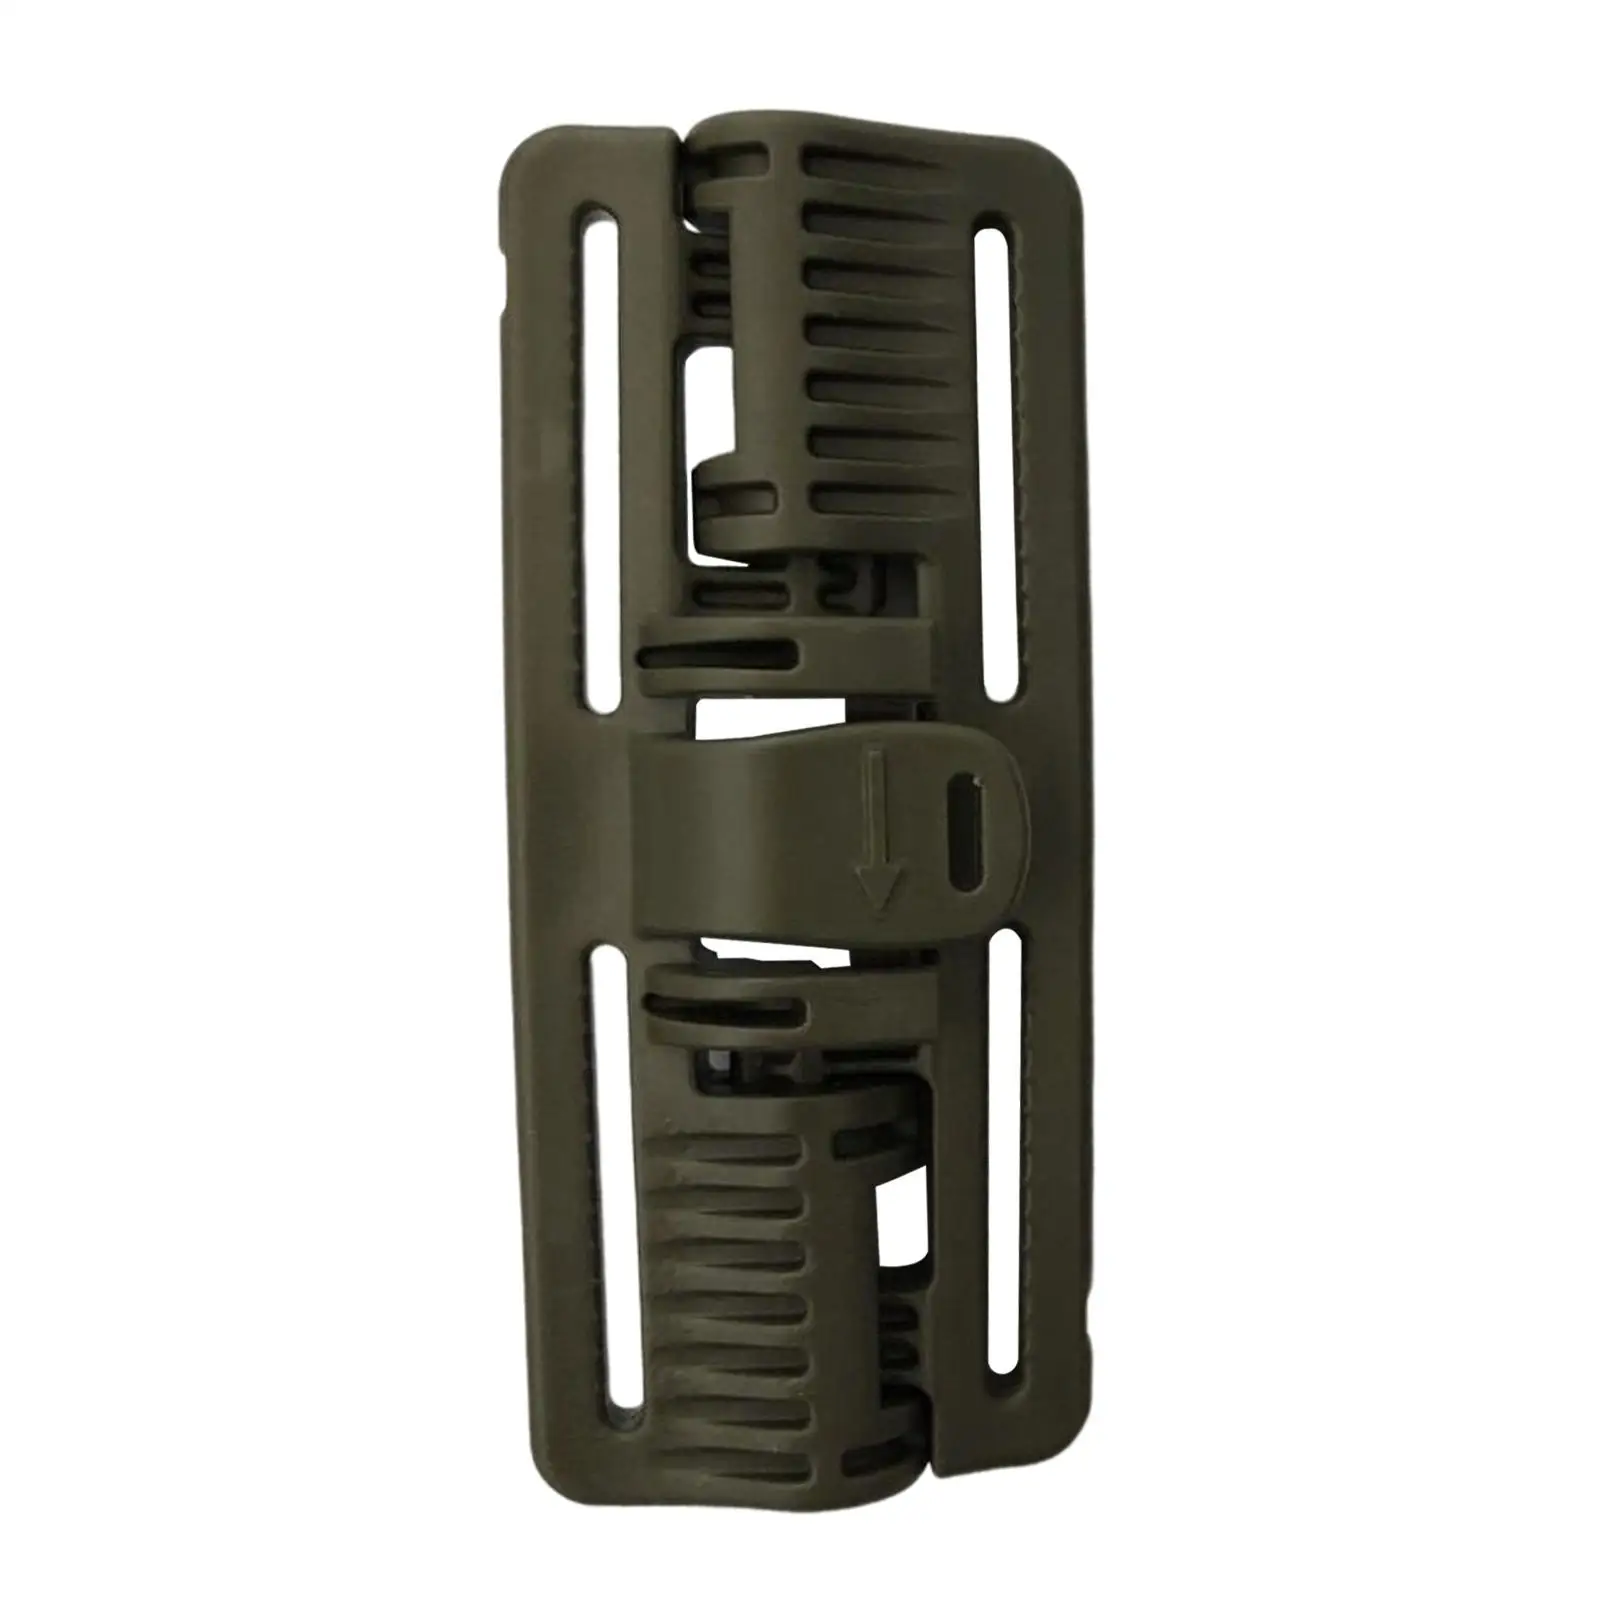 Vest Quick Release Buckle Quick Release Assembly Kit for Hunting